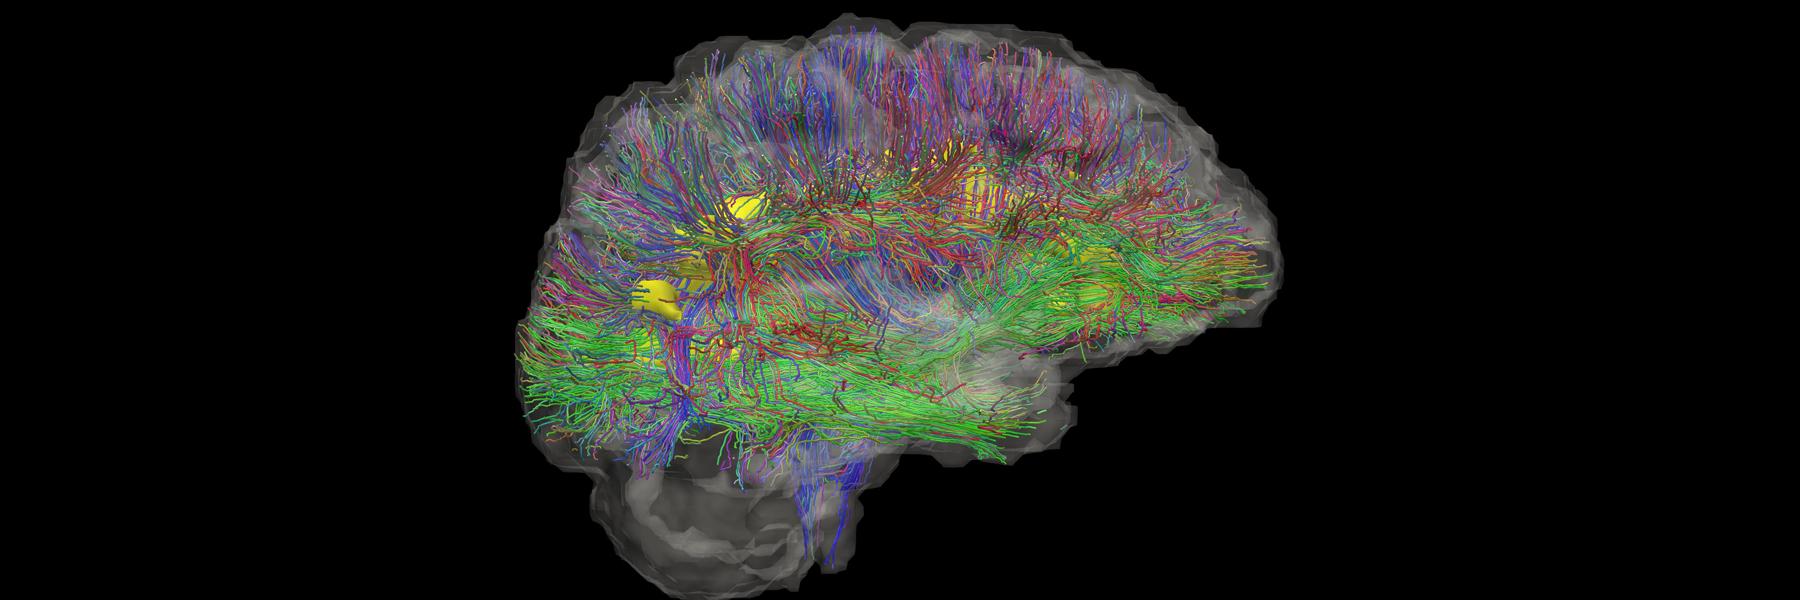 brain imaging showing white matter tracts